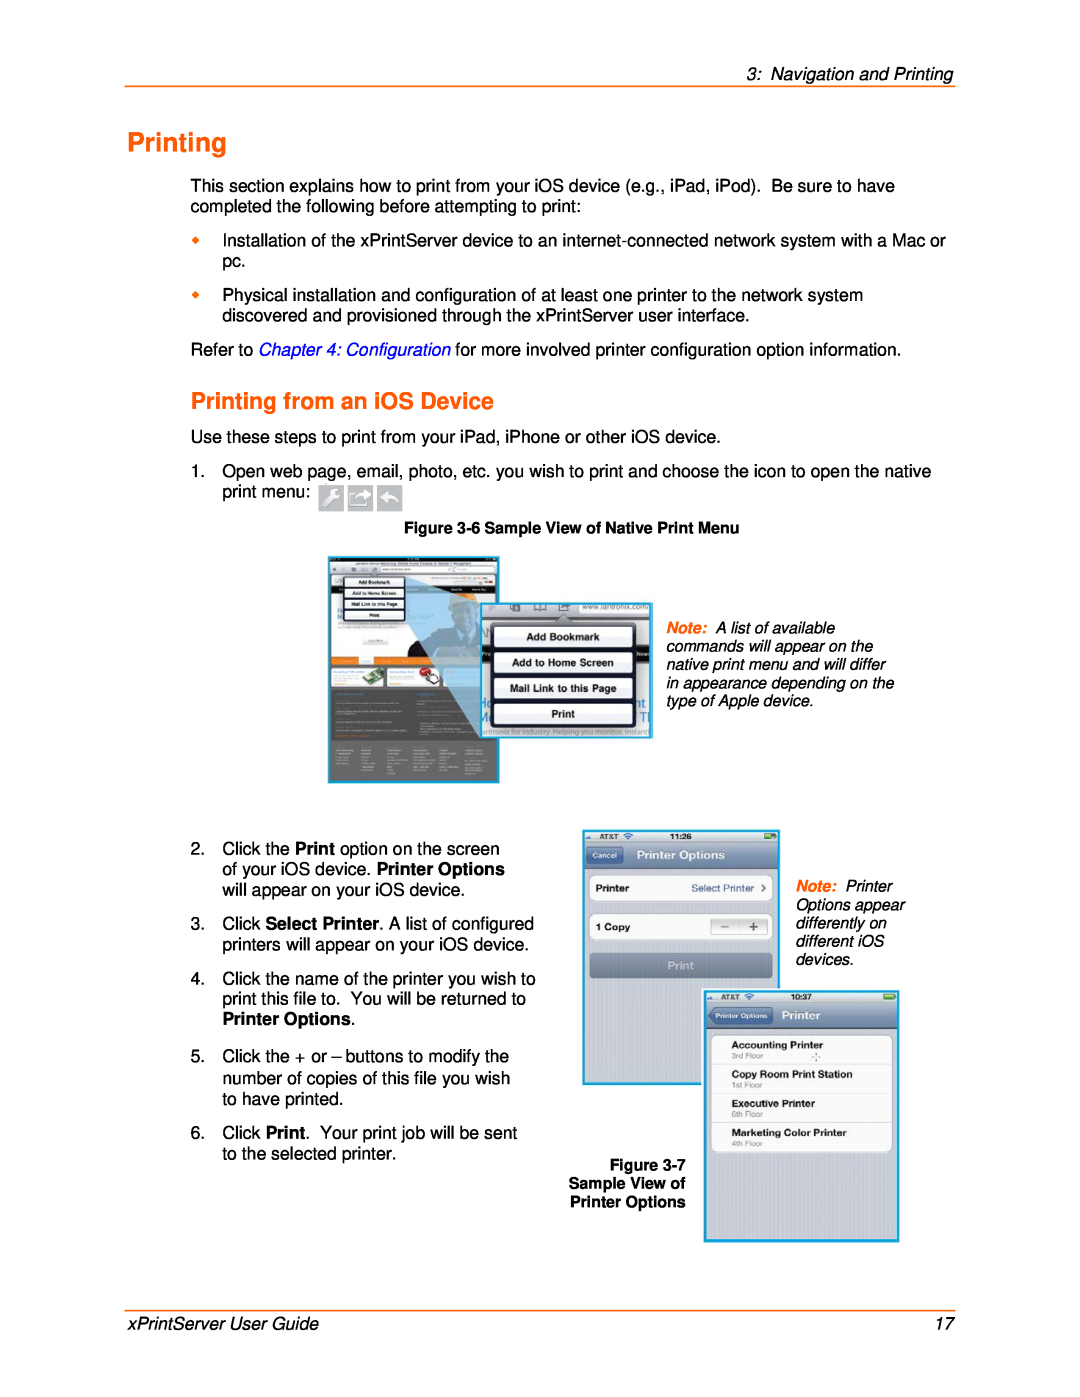 Lantronix 900-603 manual Printing from an iOS Device, Navigation and Printing, xPrintServer User Guide 